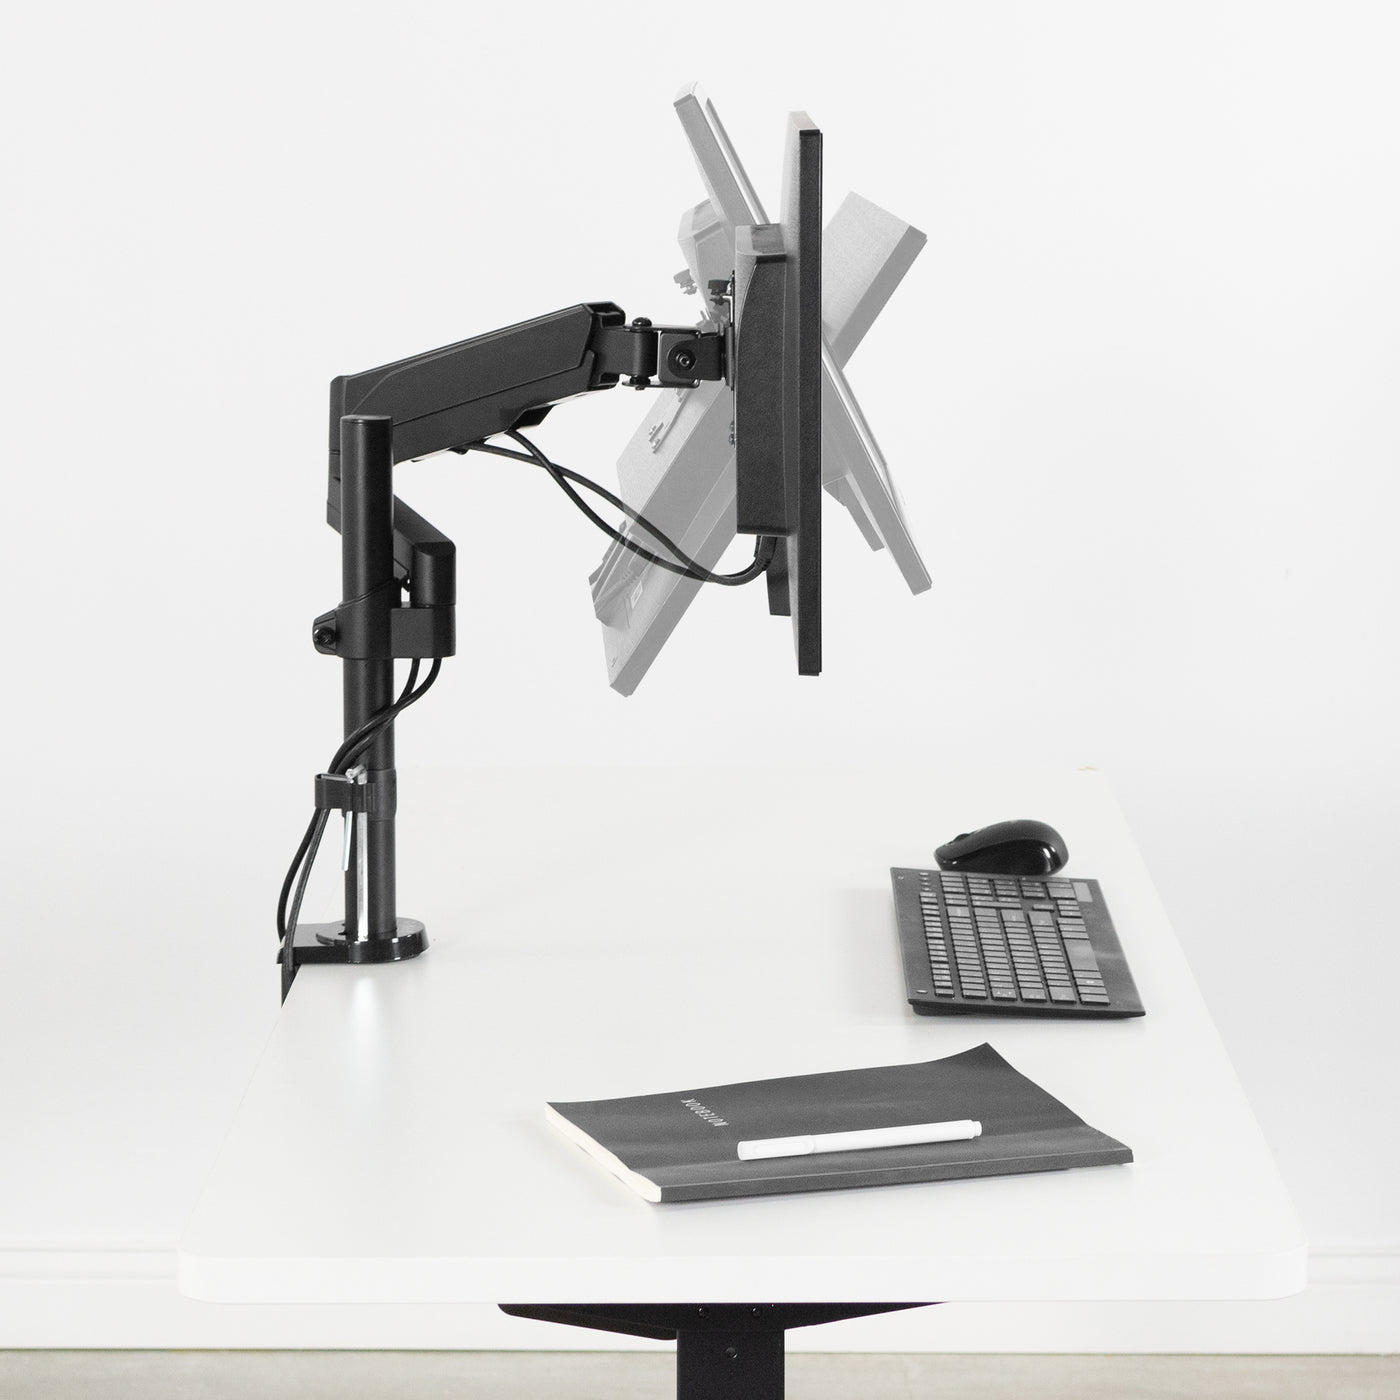 Articulation and adjustments of a pneumatic arm mounted to a clamp on a desk pole.